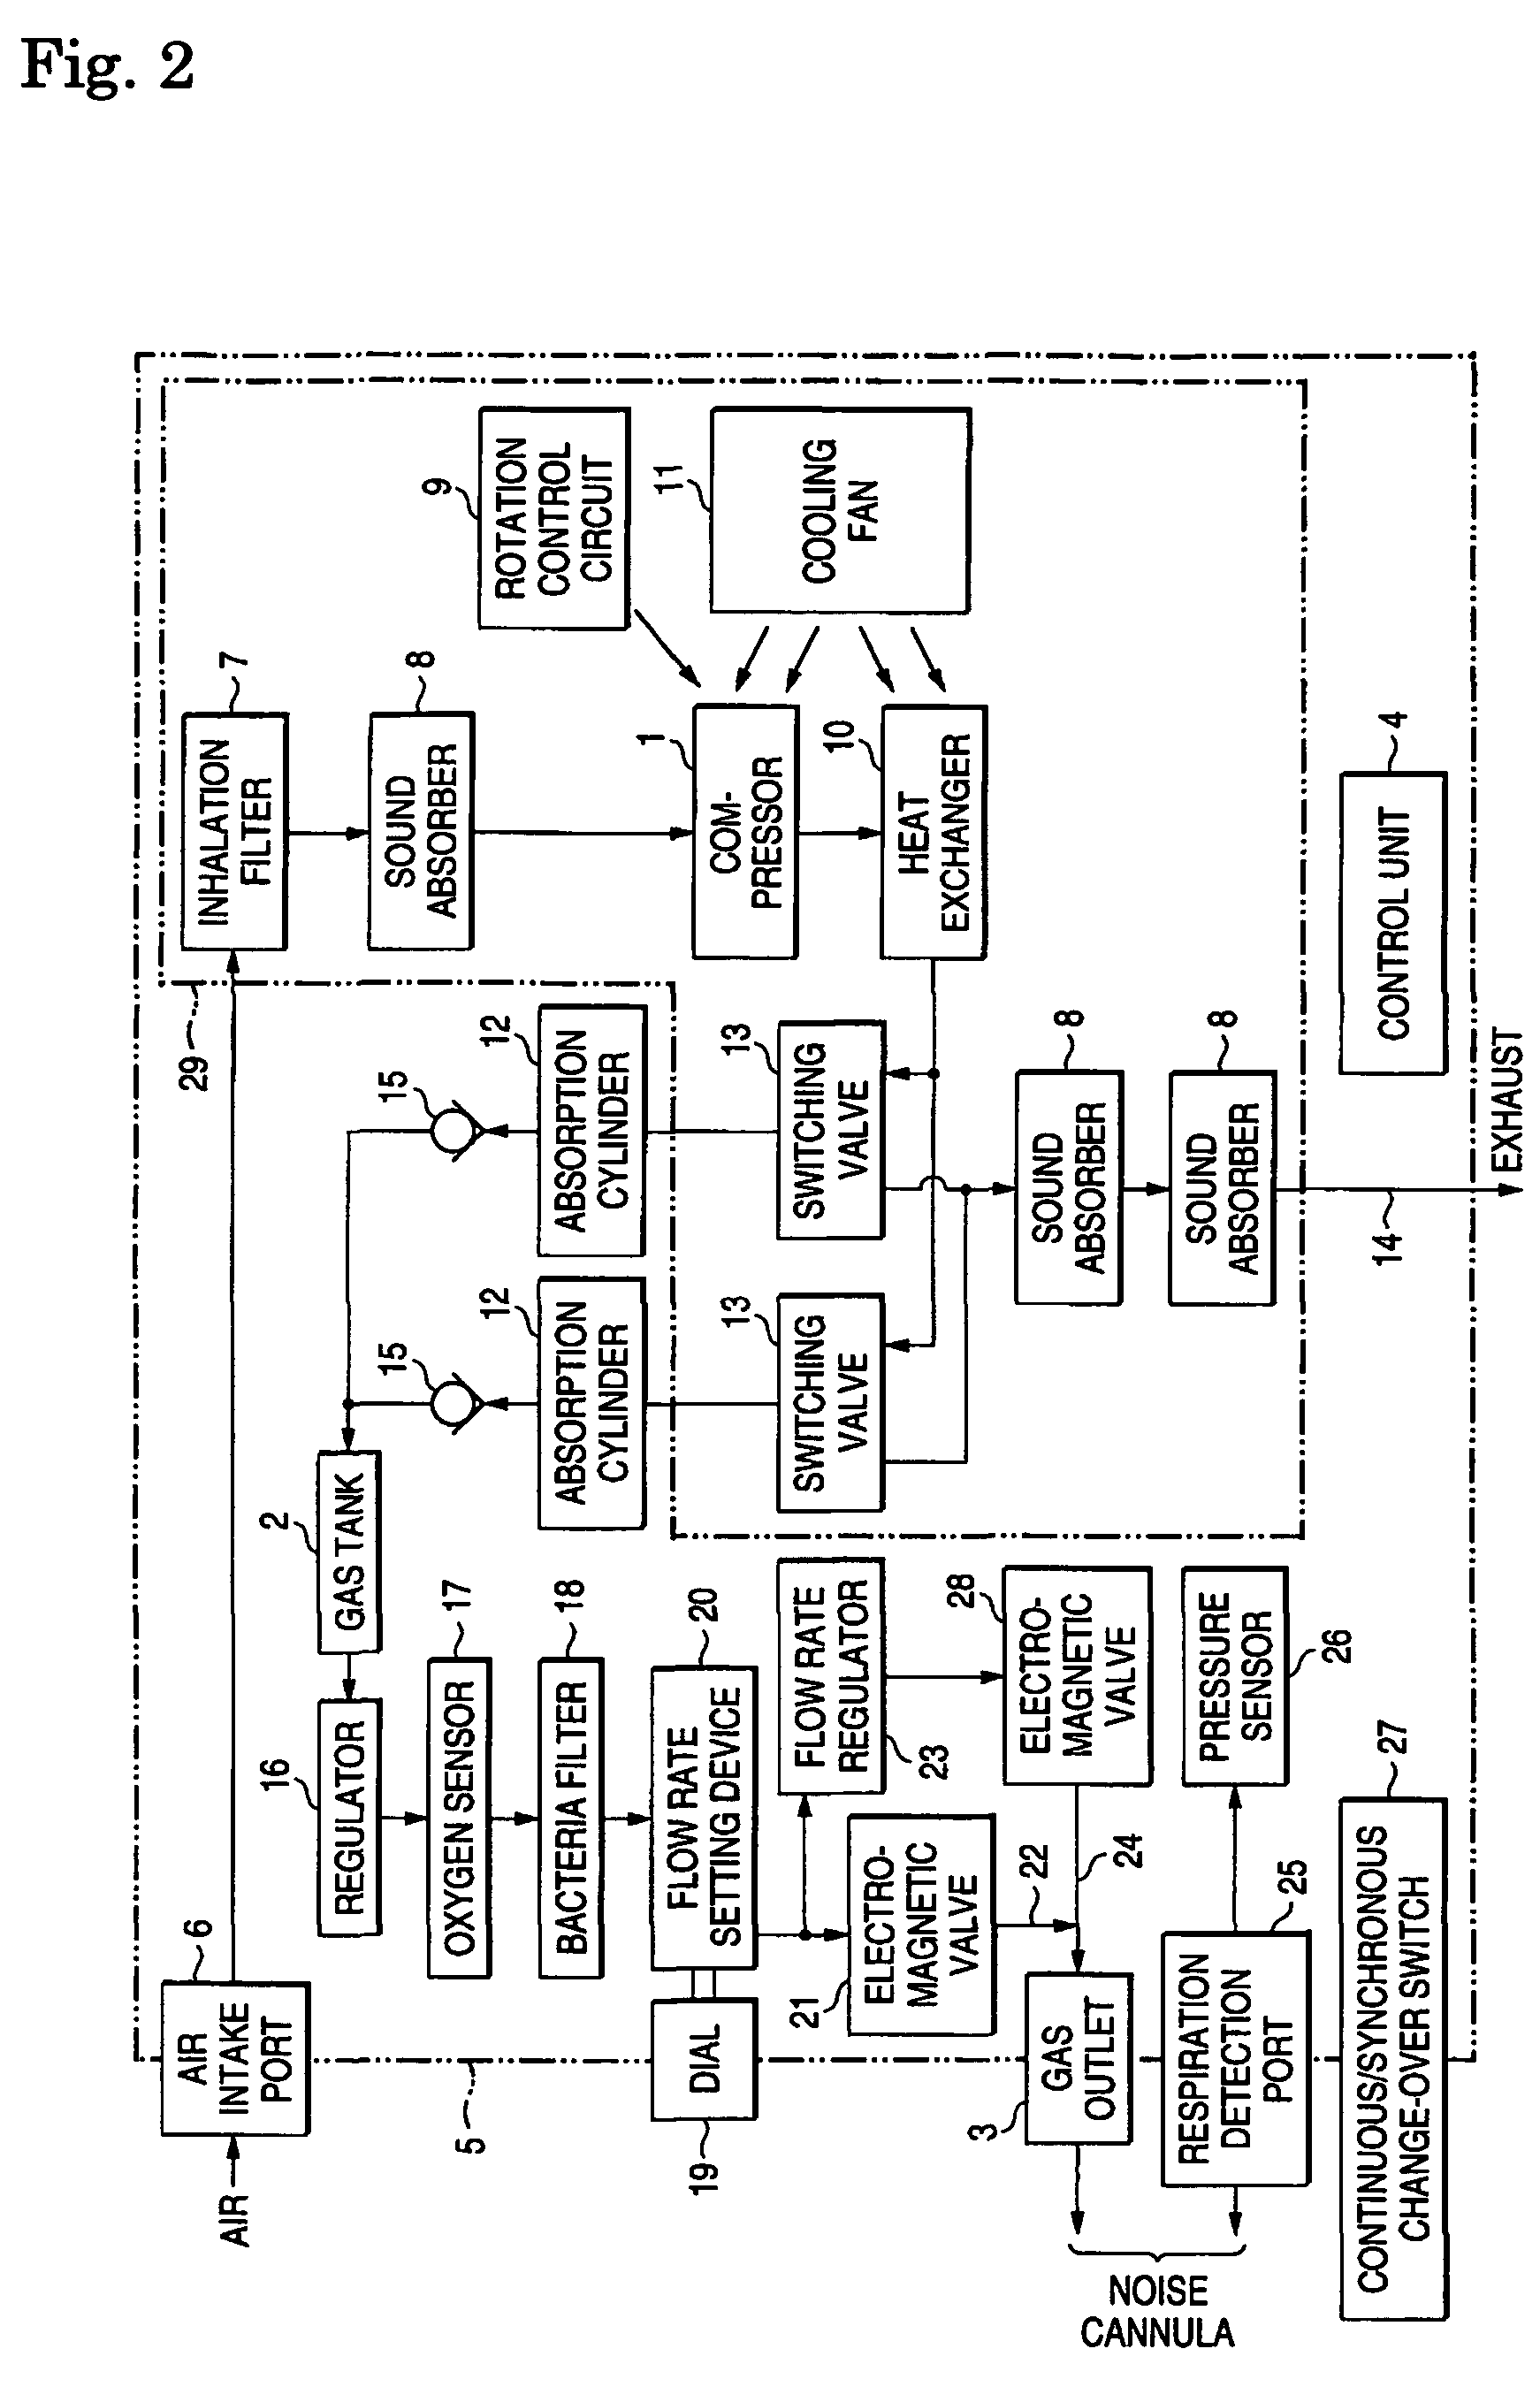 Oxygen concentrating apparatus